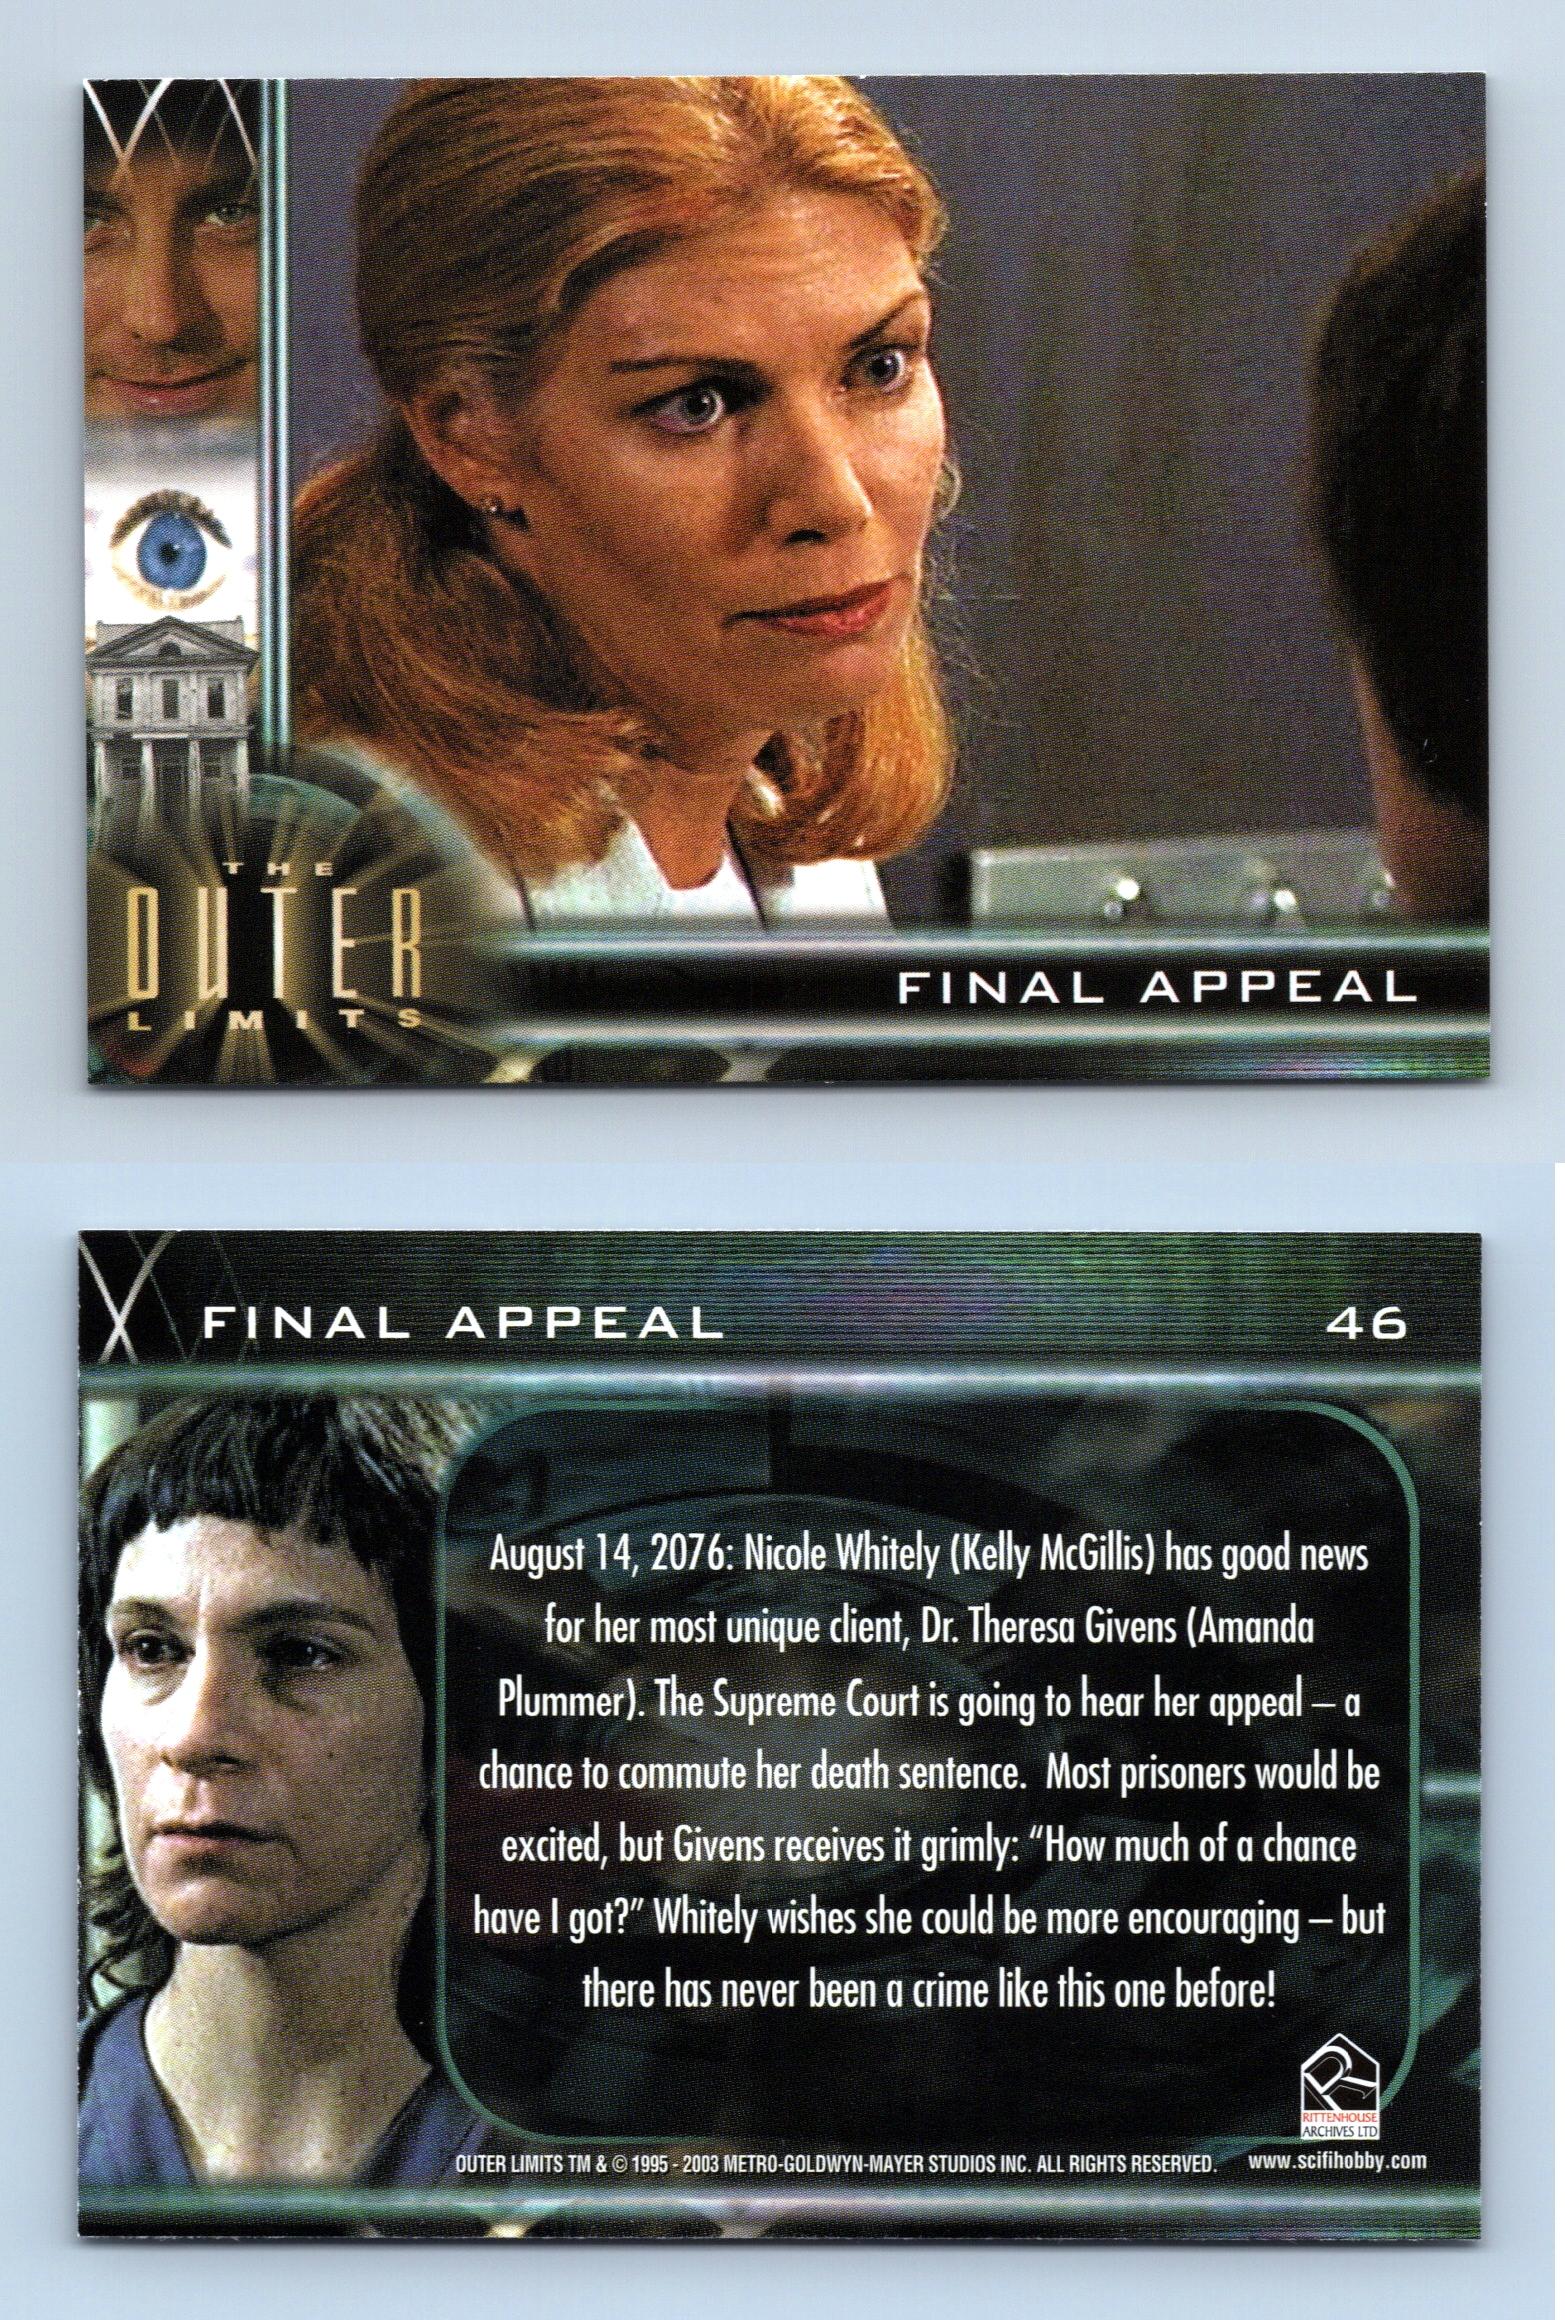 Final Appeal 46 The Outer Limits Sex Cyborgs And Science Fiction 2003 Card